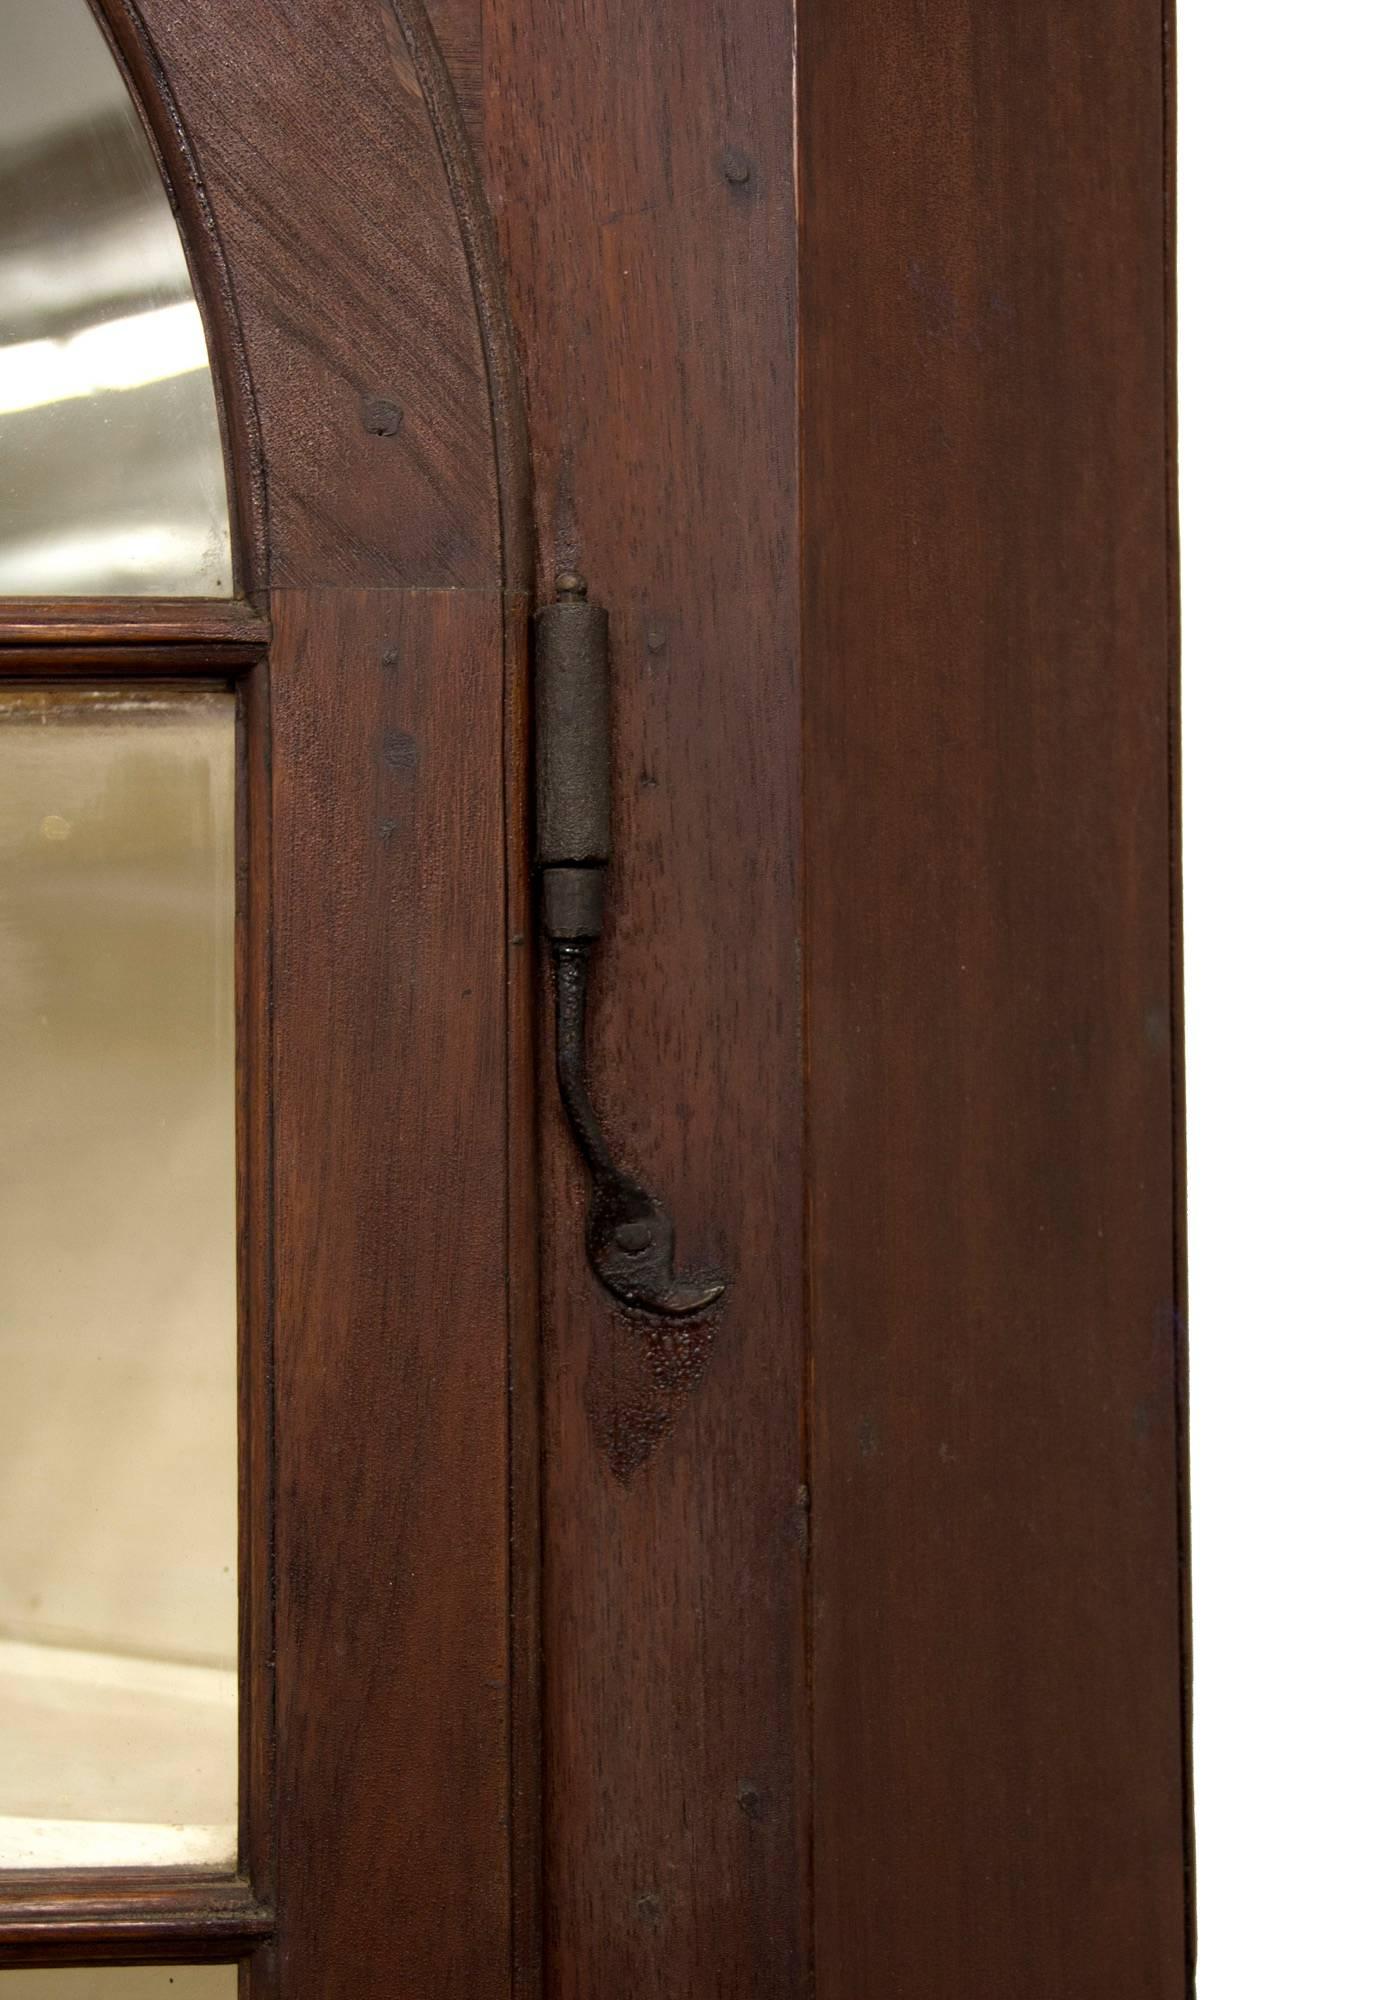 It is rare to find a fine small-scale (narrow) walnut corner cupboard and this piece is certainly a rarity. It retains its first early rat tail hinges, which clearly date this piece. The base has very interesting raised panels; note the additional